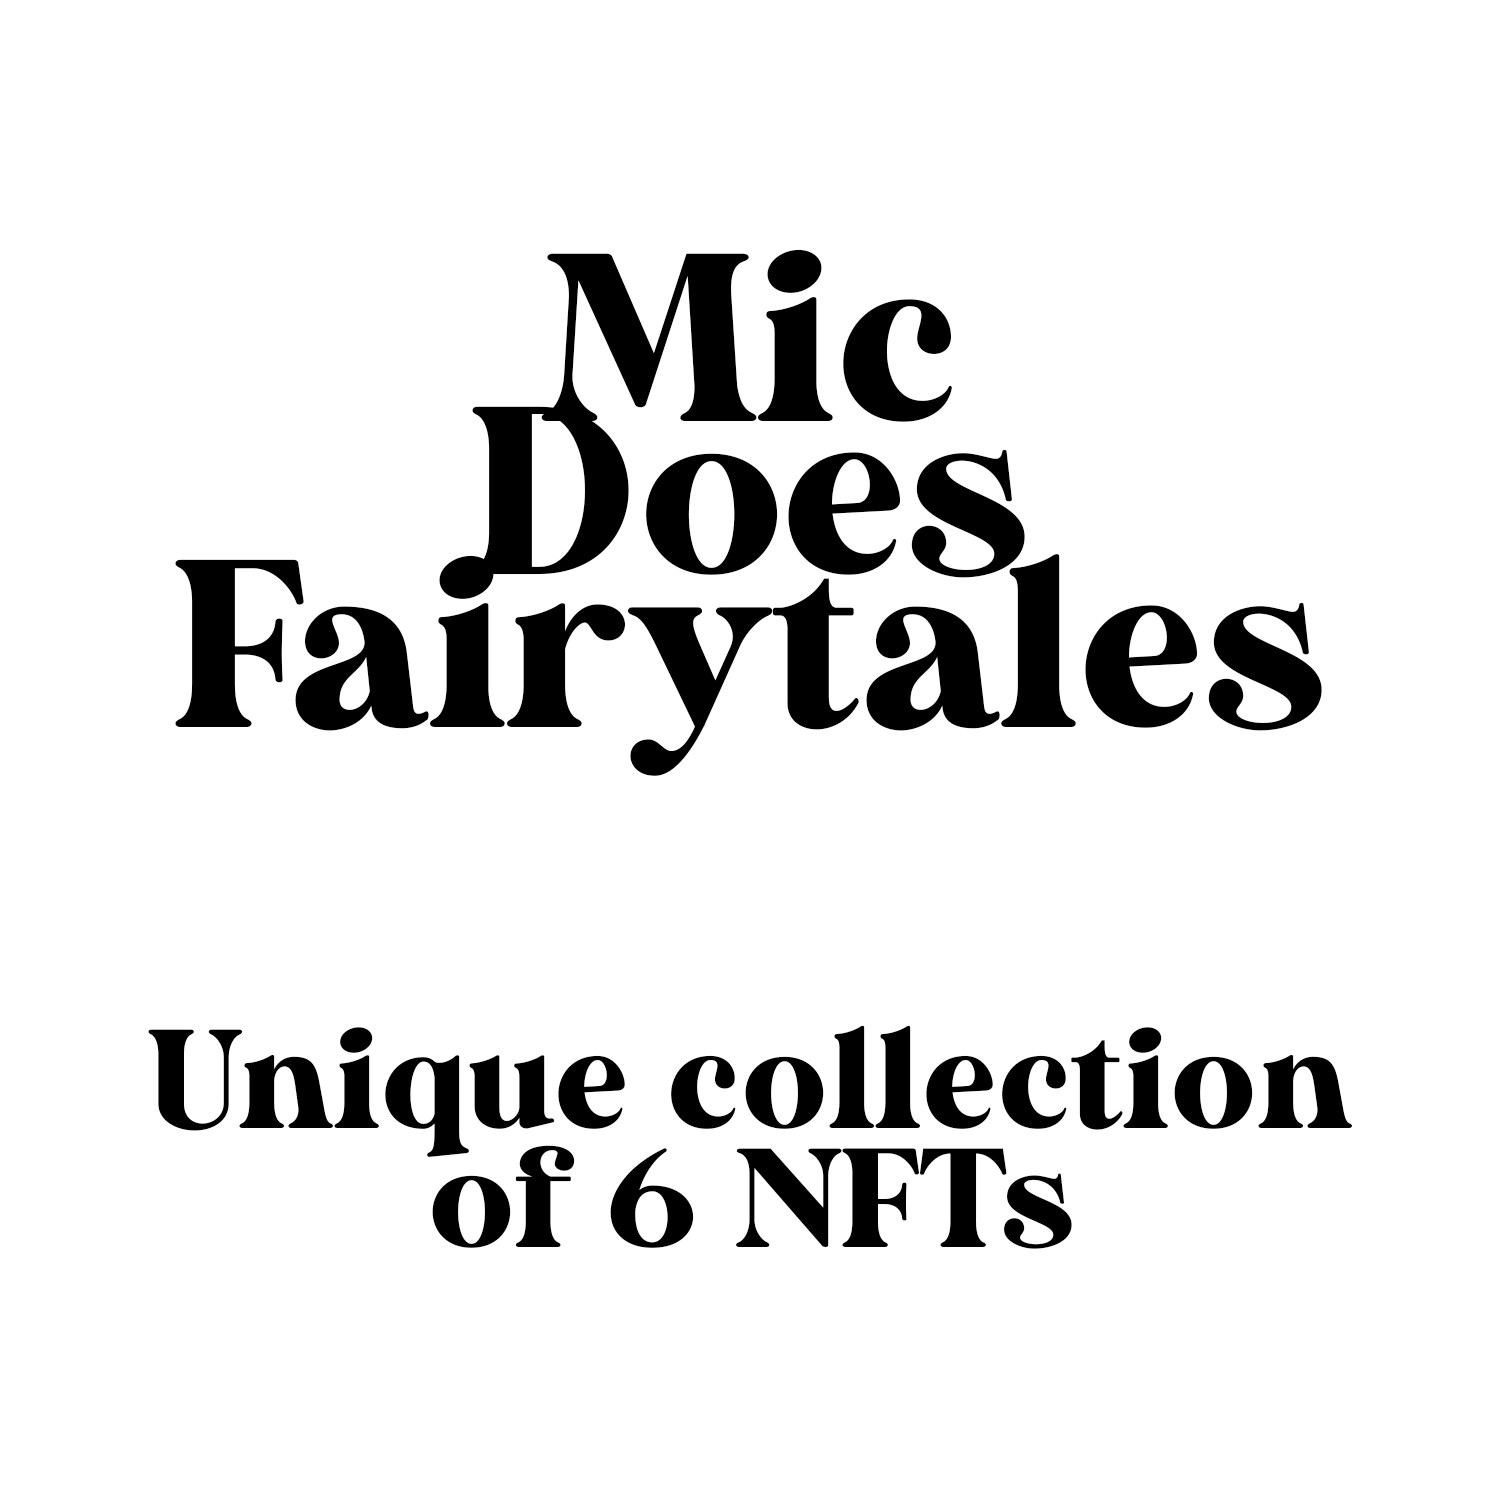 Mic Does Fairy Tales - Exclusive collection of just 6 NFTs